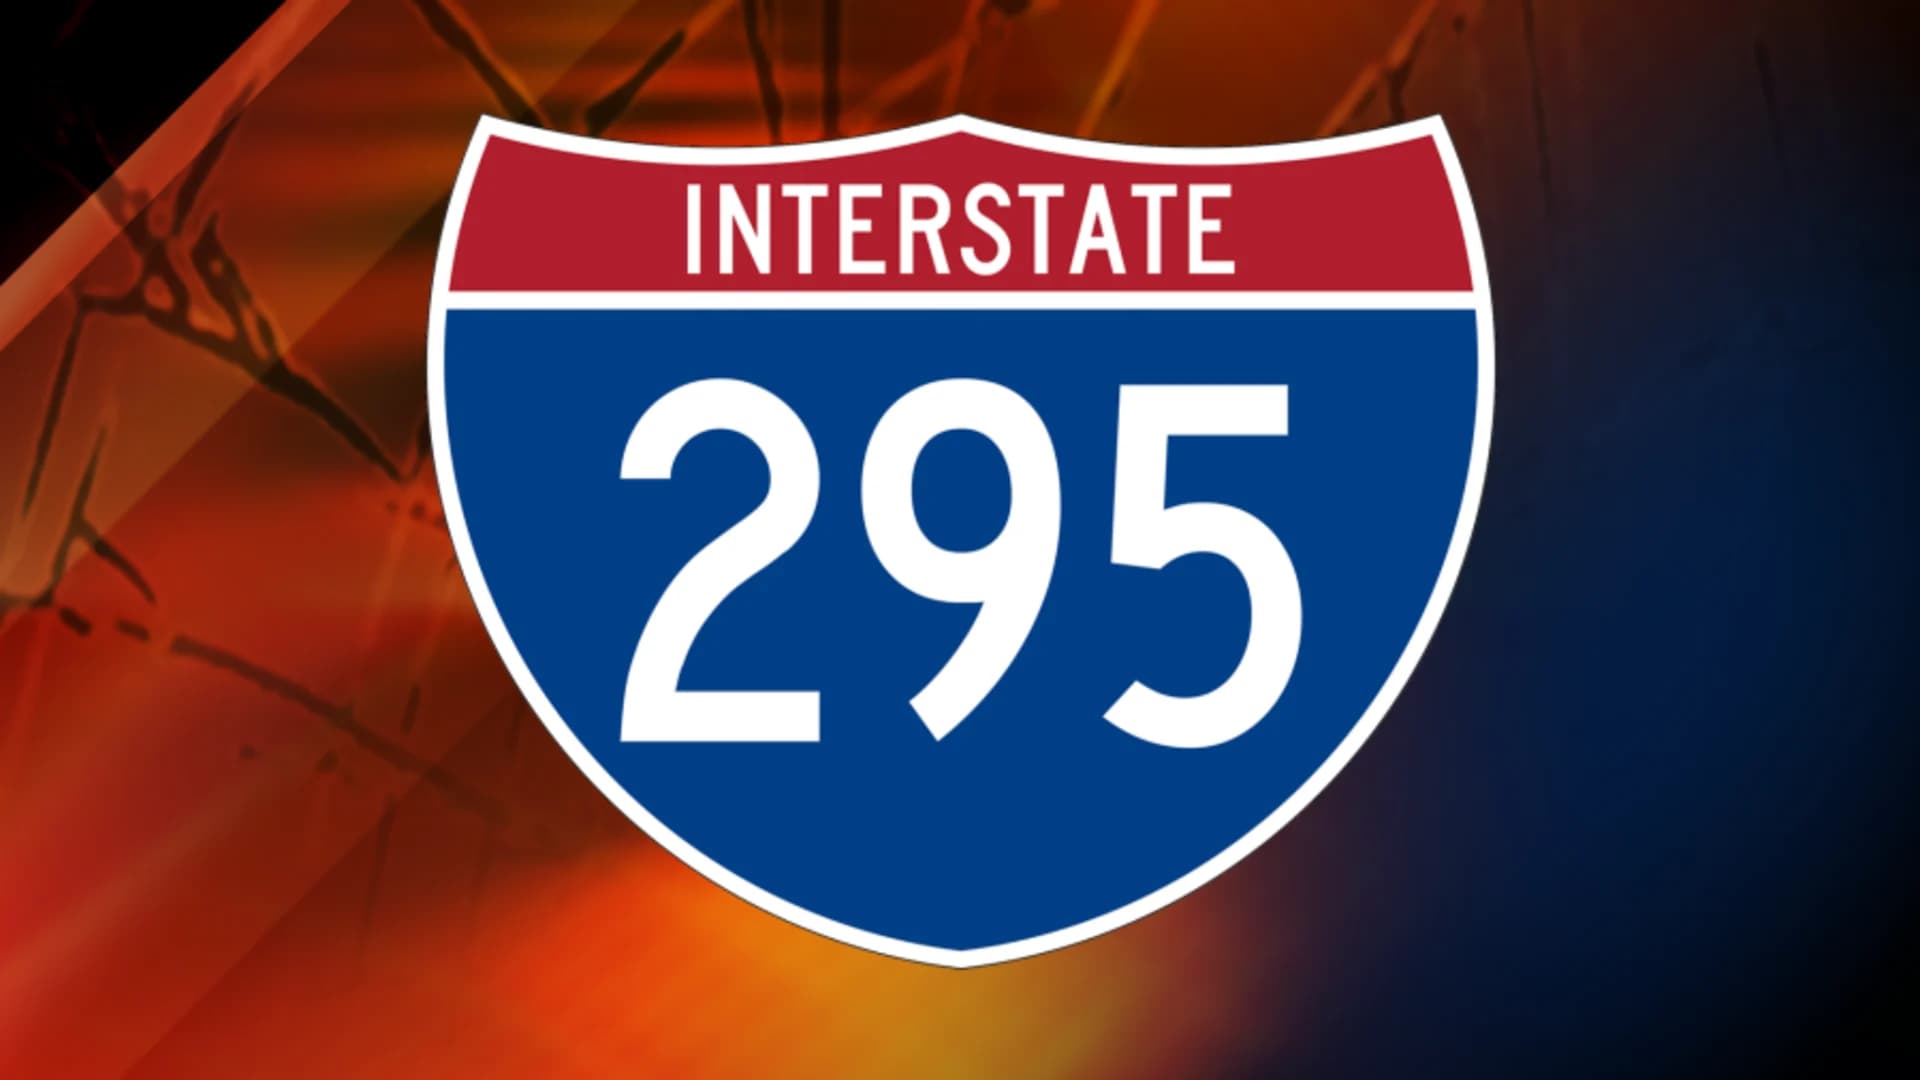 State police: 3 teens injured after driver loses control of vehicle on I-295